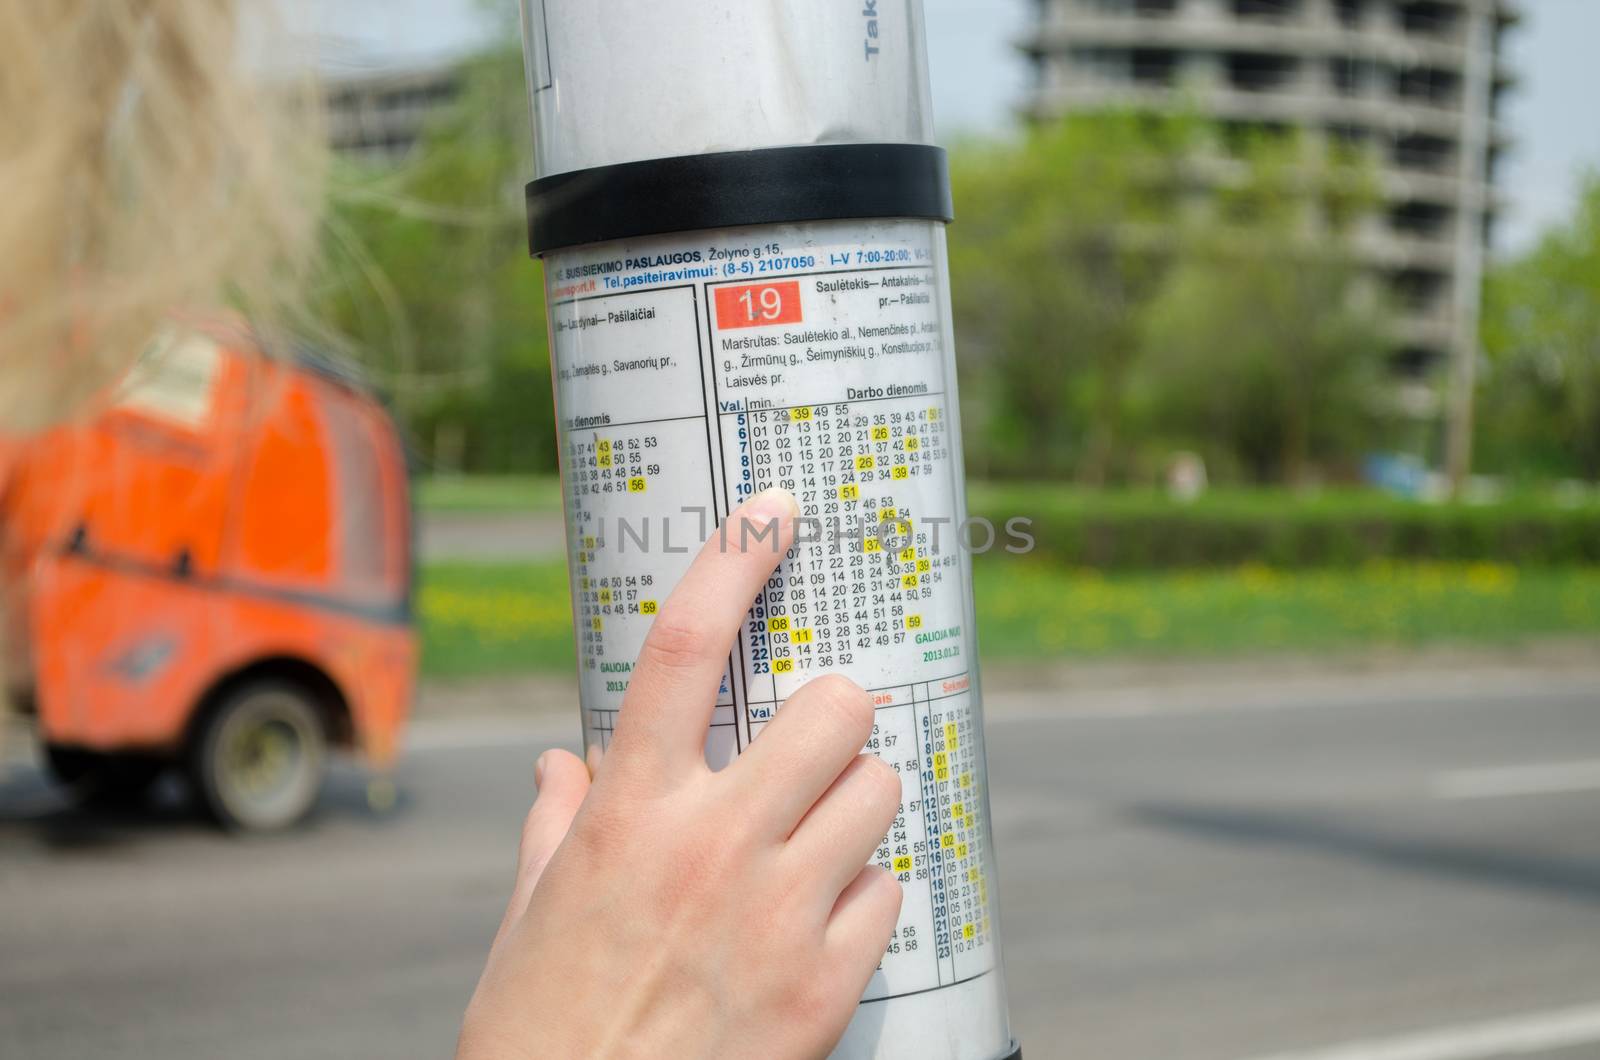 bus driving schedule under a glass hood and hand of woman